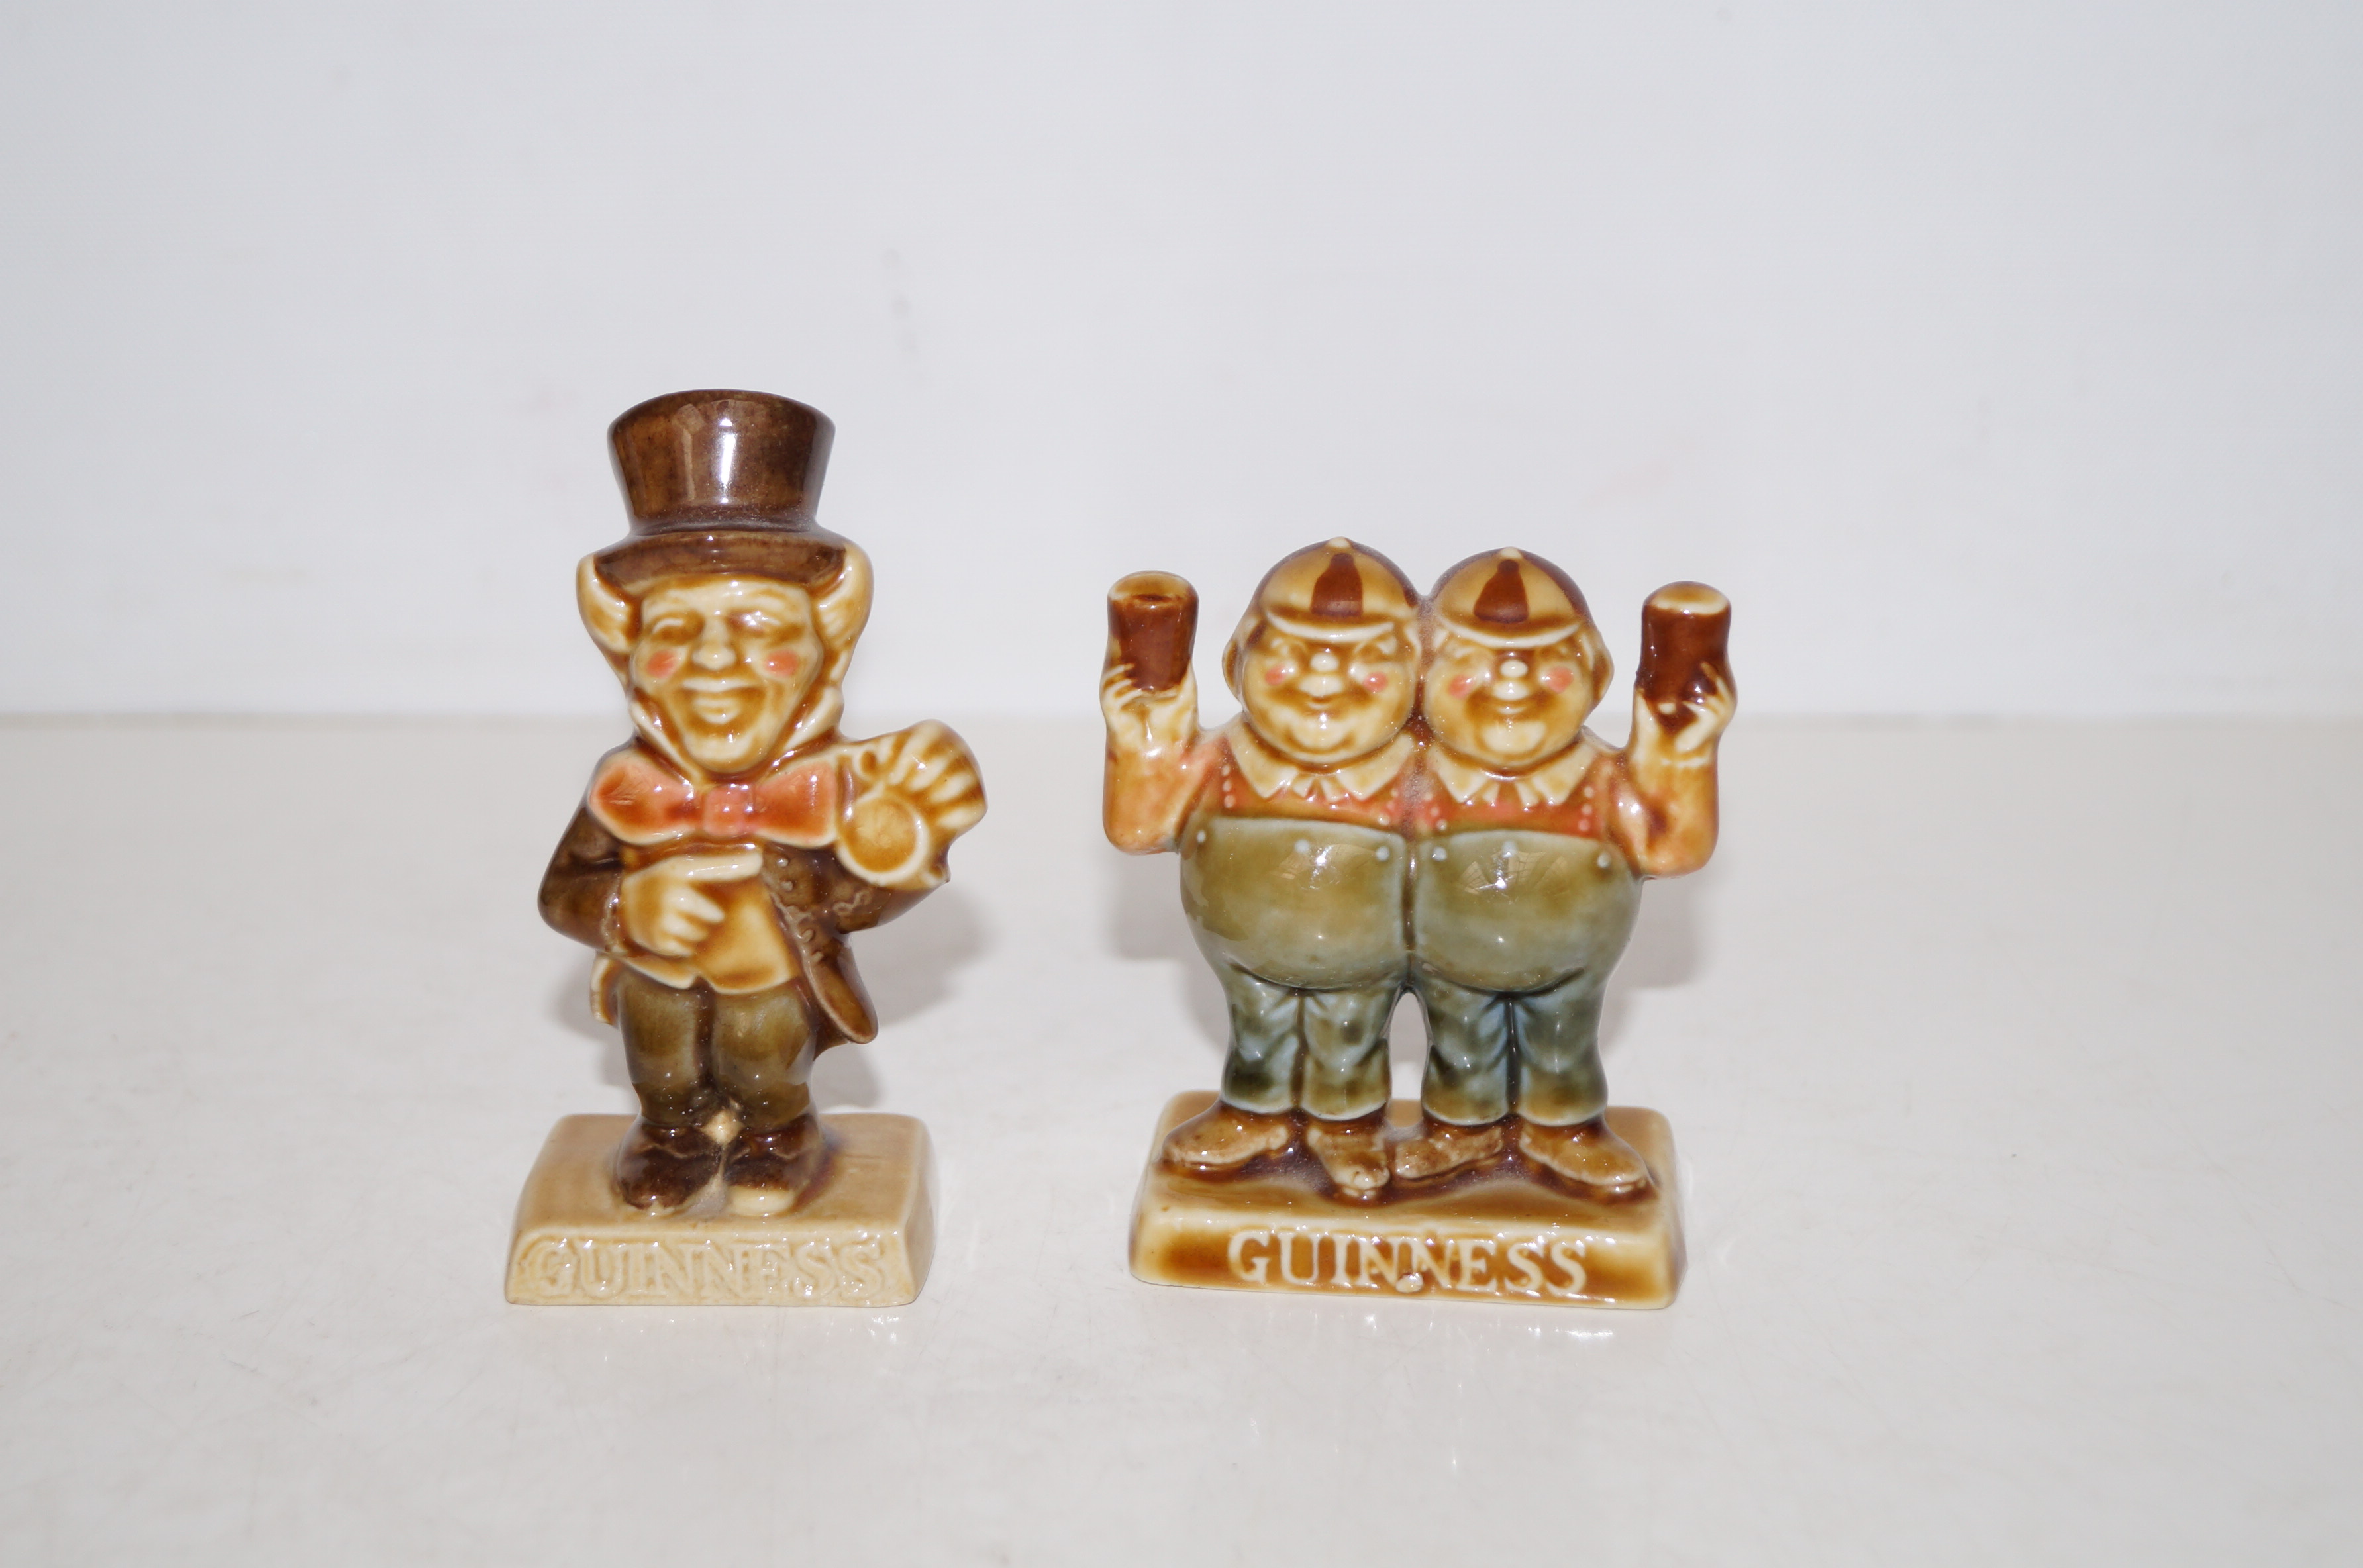 2x Wade Guinness advertising whimsies